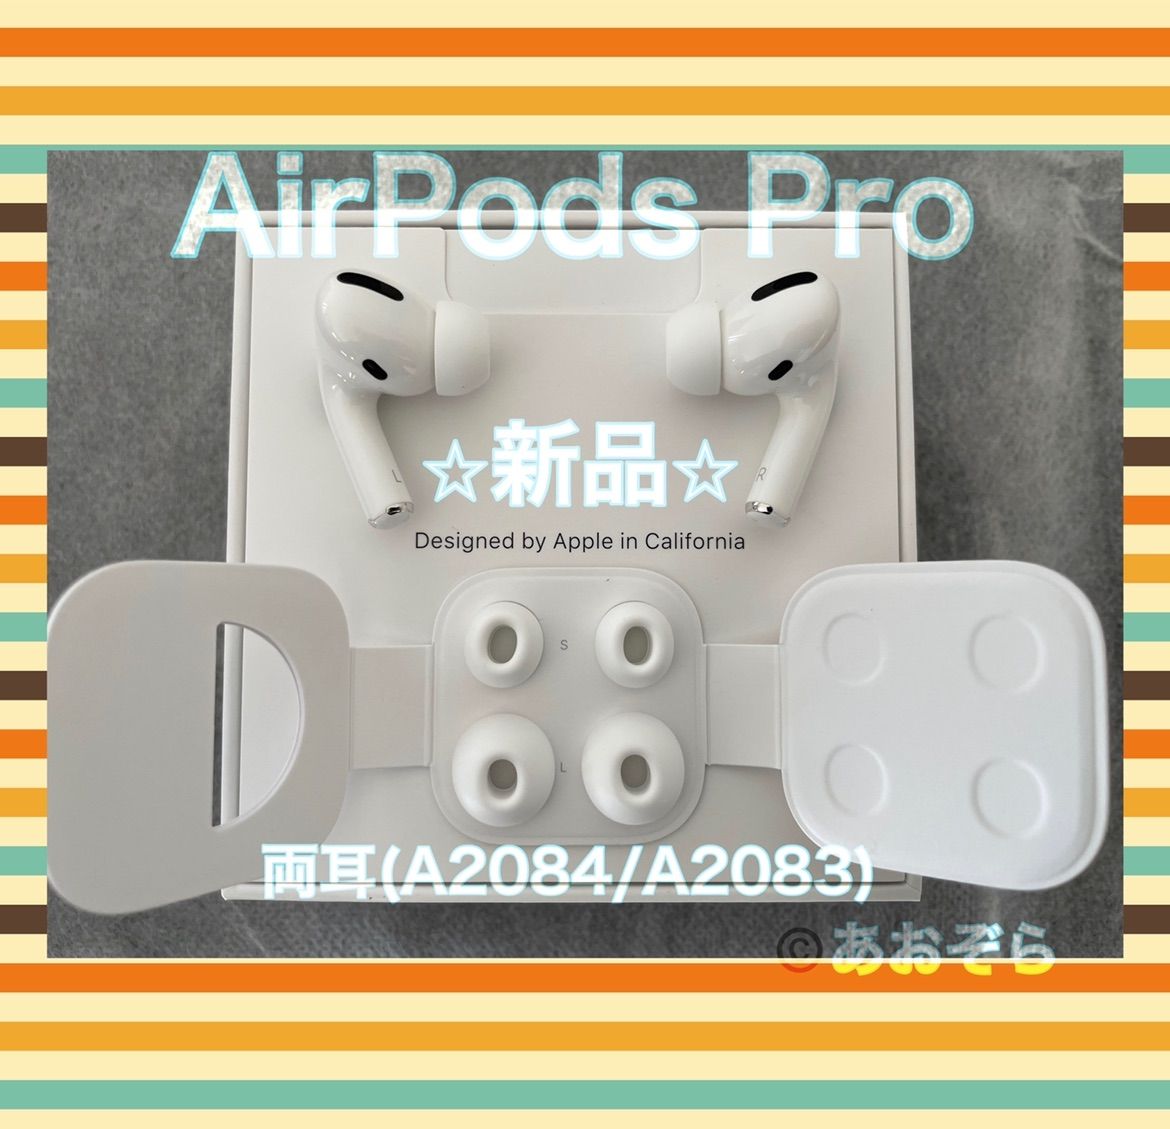 AirPods Pro / 両耳のみ (A2084 A2083) 新品・正規品 - あおぞら